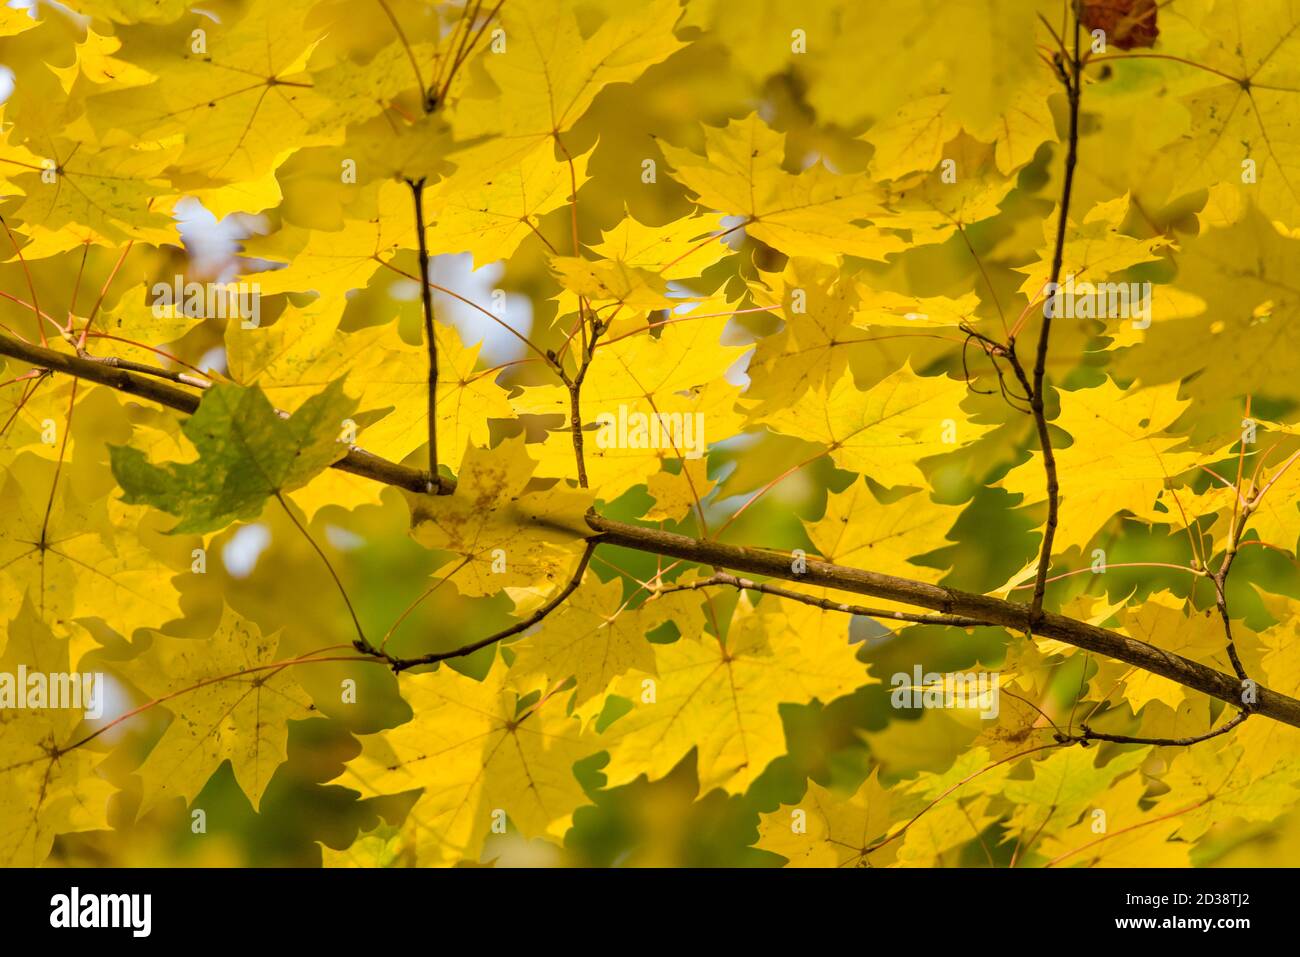 Yellow autumn maple leaves and branches. background. Stock Photo